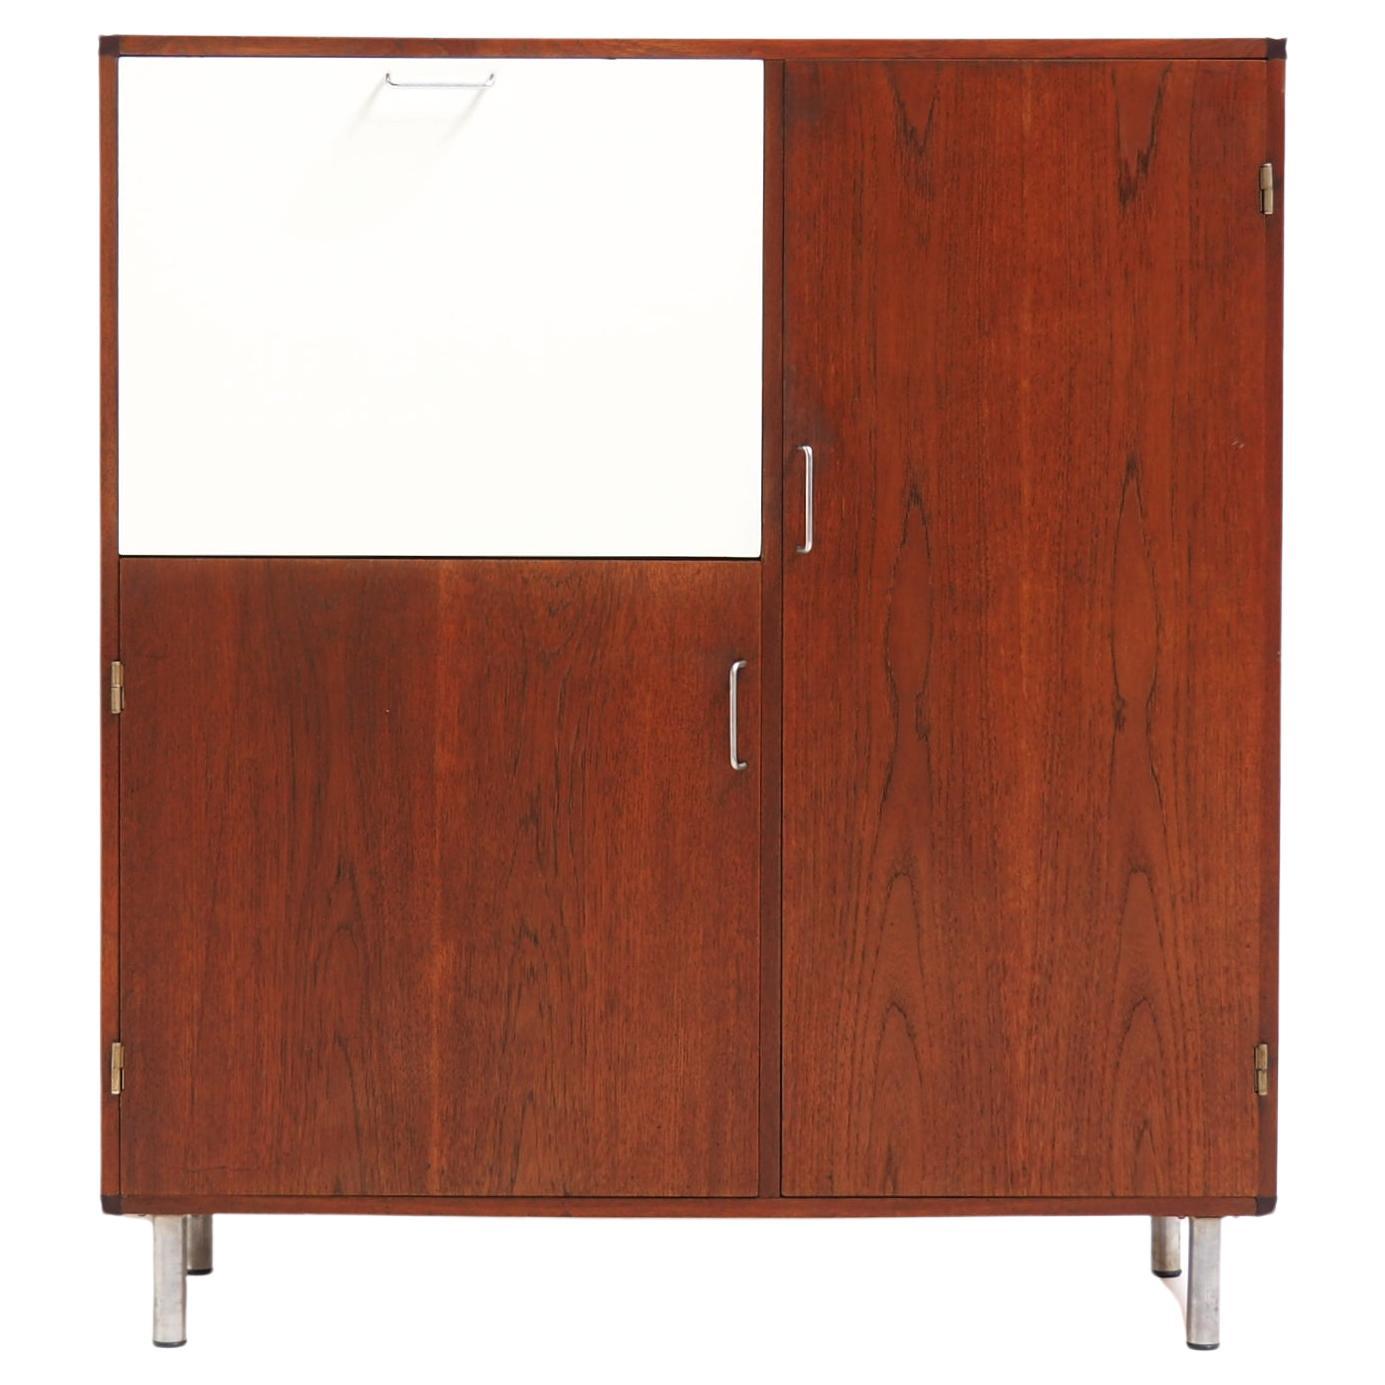 Pastoe 'Made to Measure' Bar Cabinet Designed by Cees Braakman